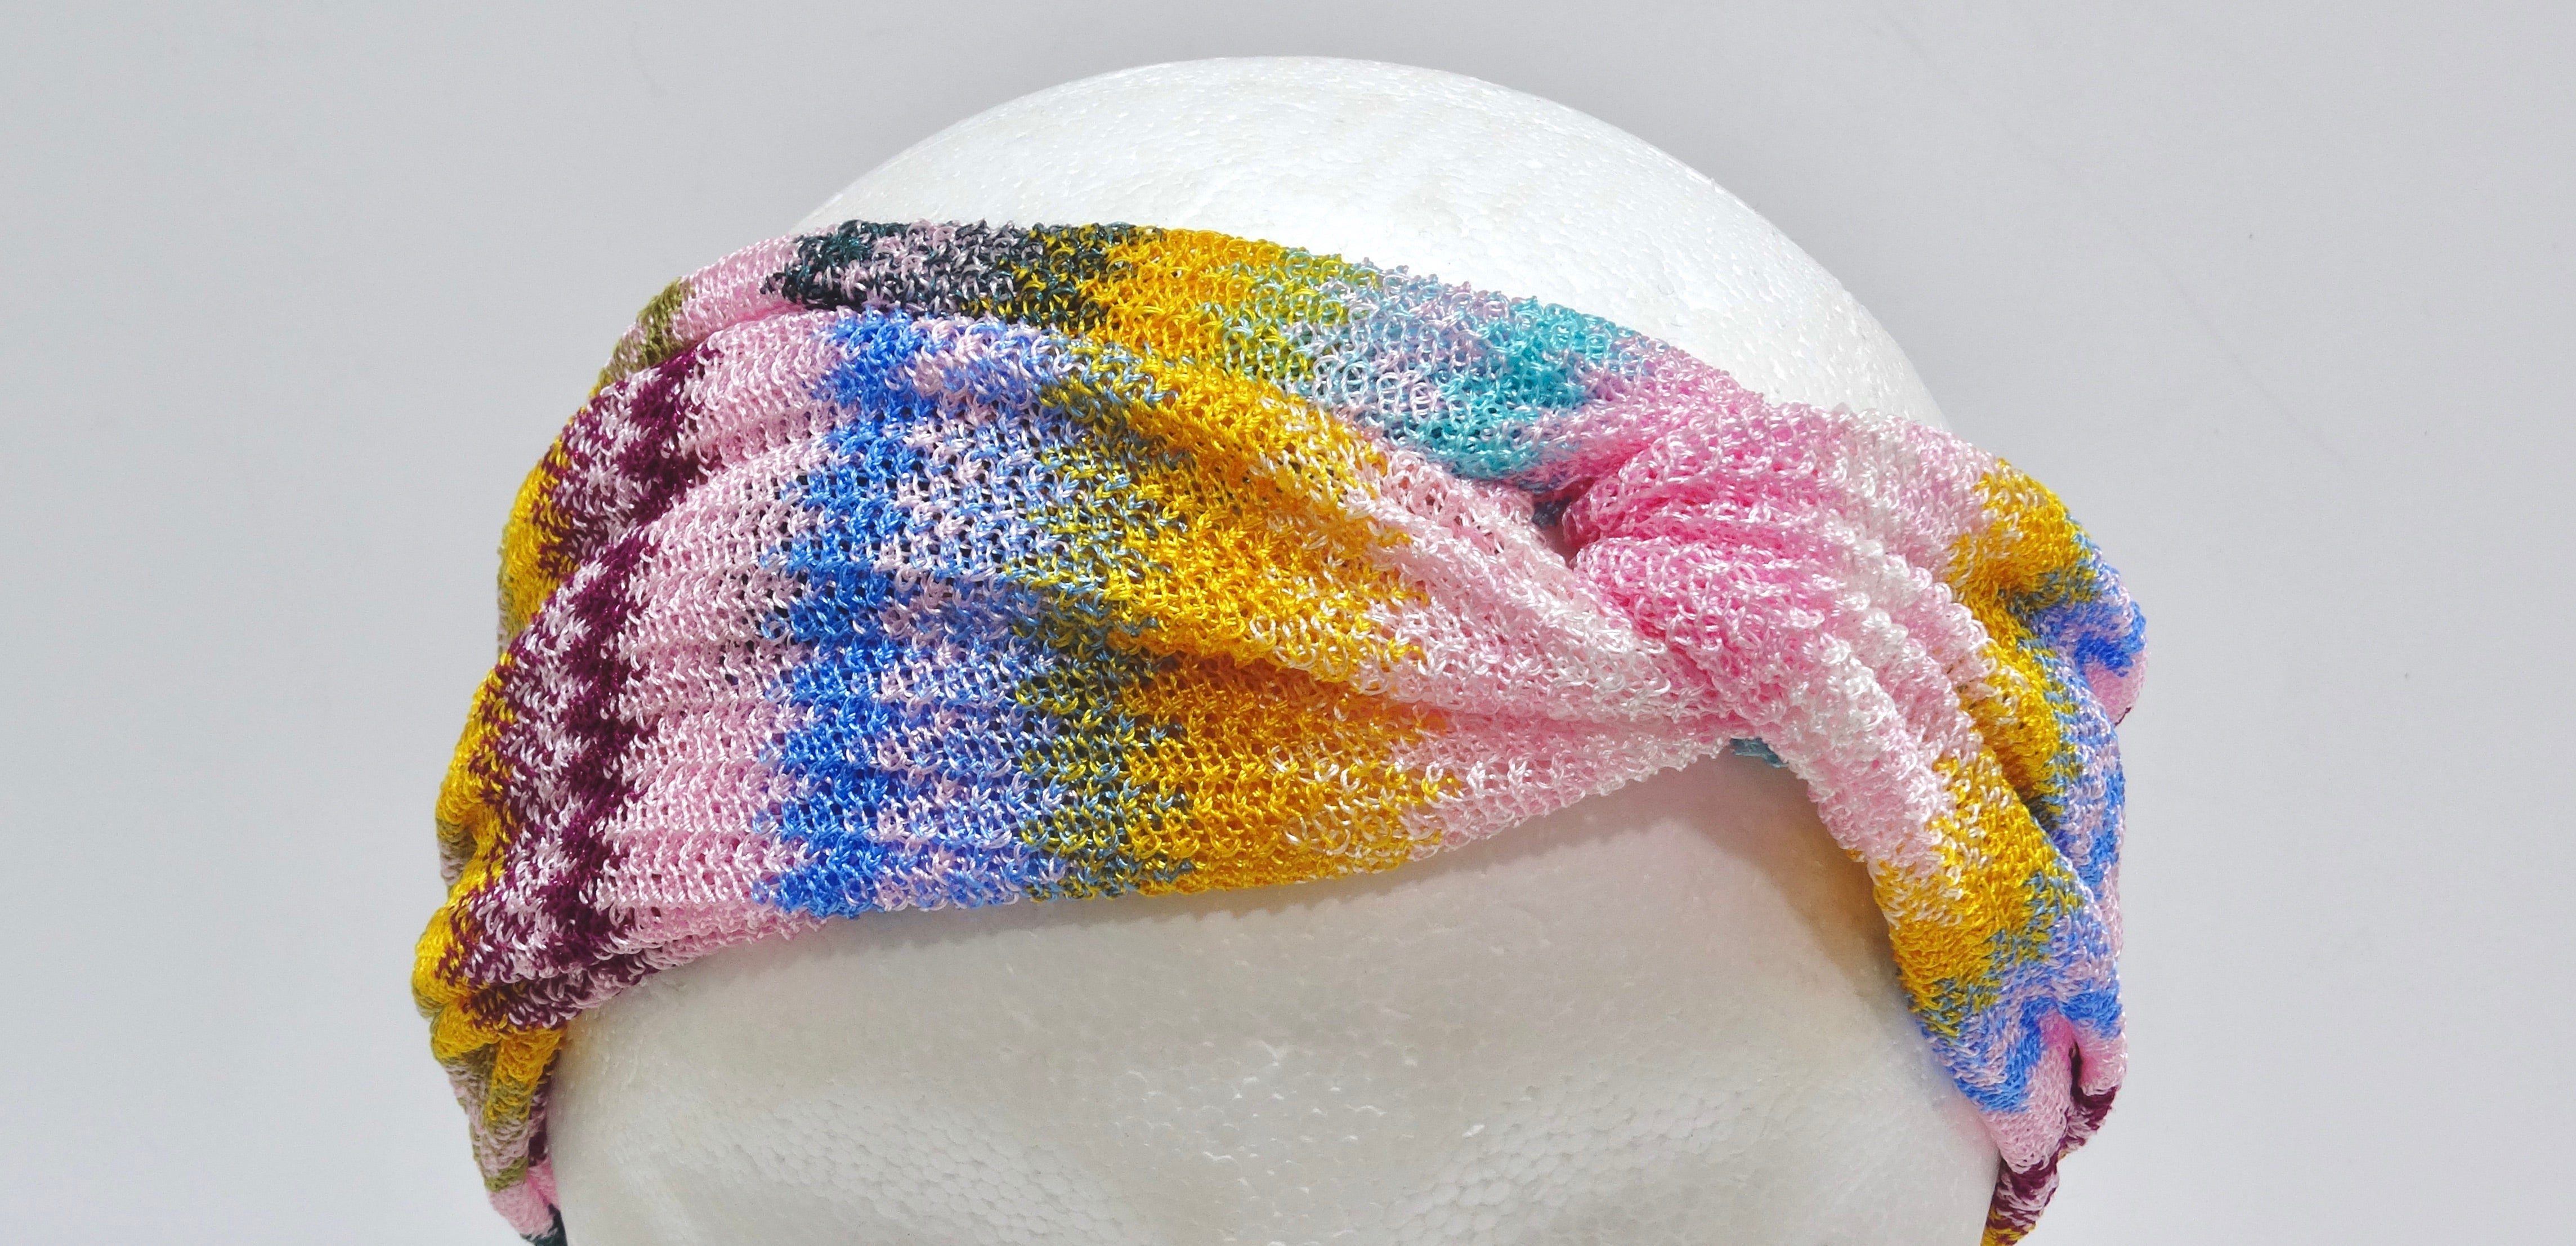 This MISSONI multi-color knotted headband is made in the signature chevron-pattern giving the chic and trendy Missoni signature. This designer accessory is the perfect summer accessory to add to your wardrobe. This headband is crafted in a